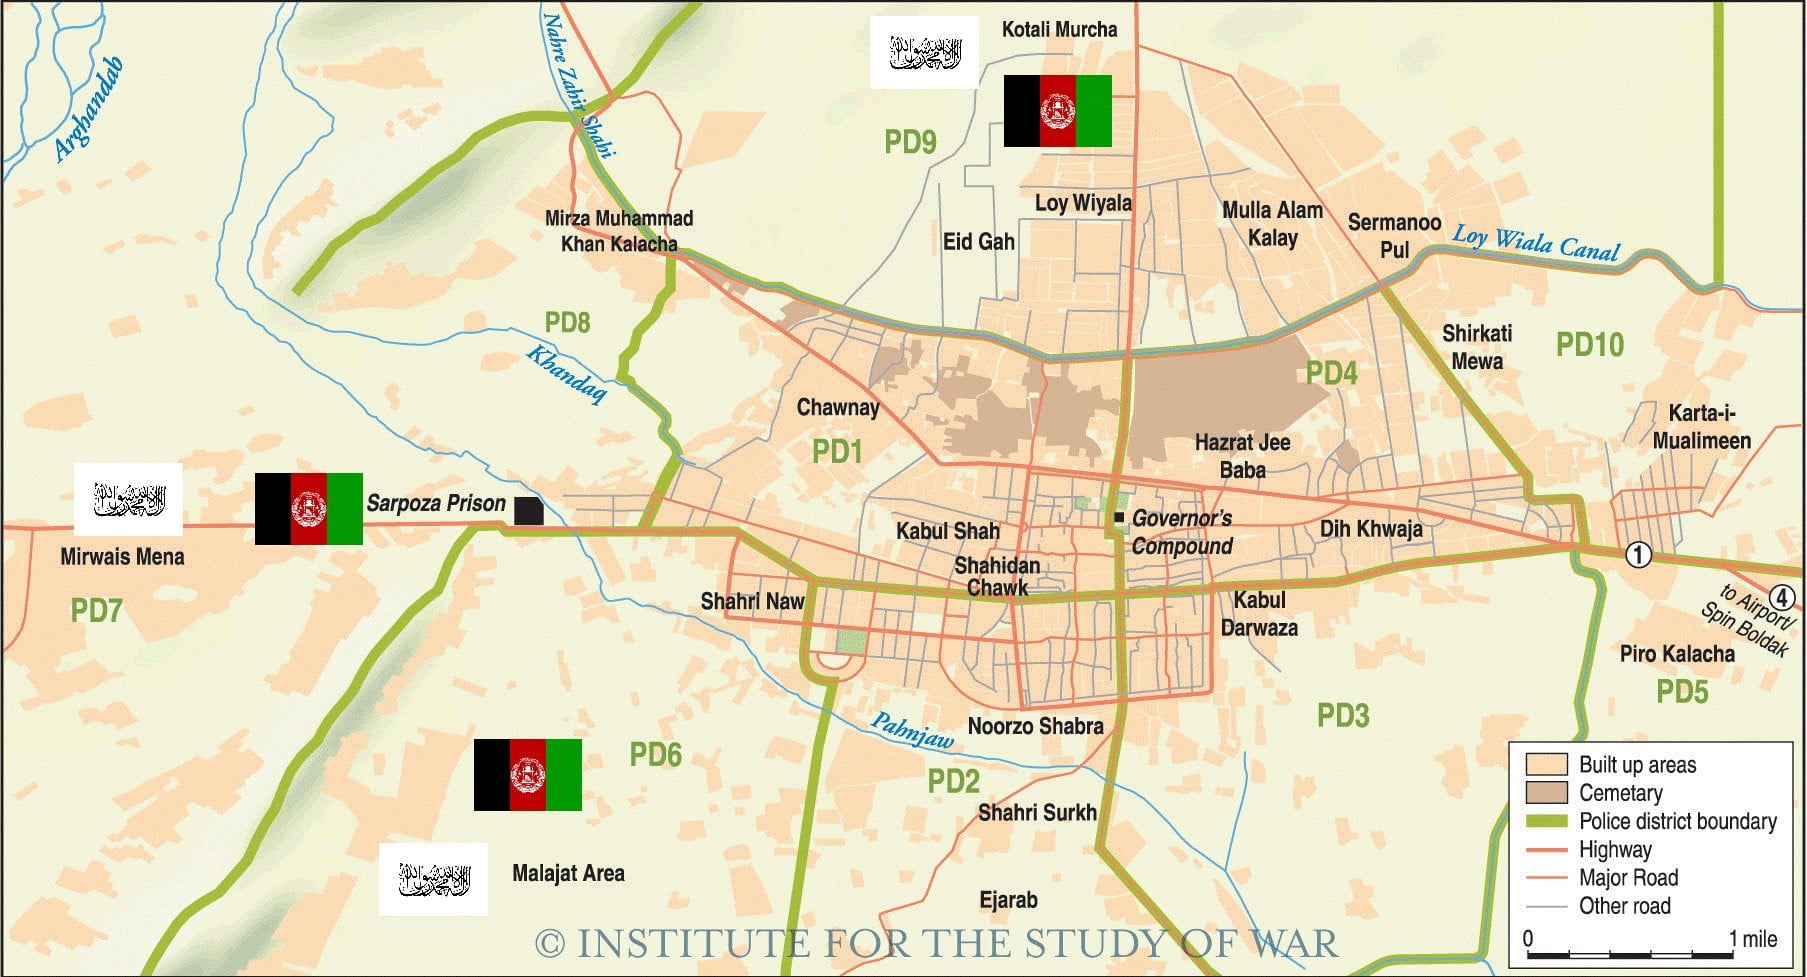 At least three police districts under siege in Kandahar...